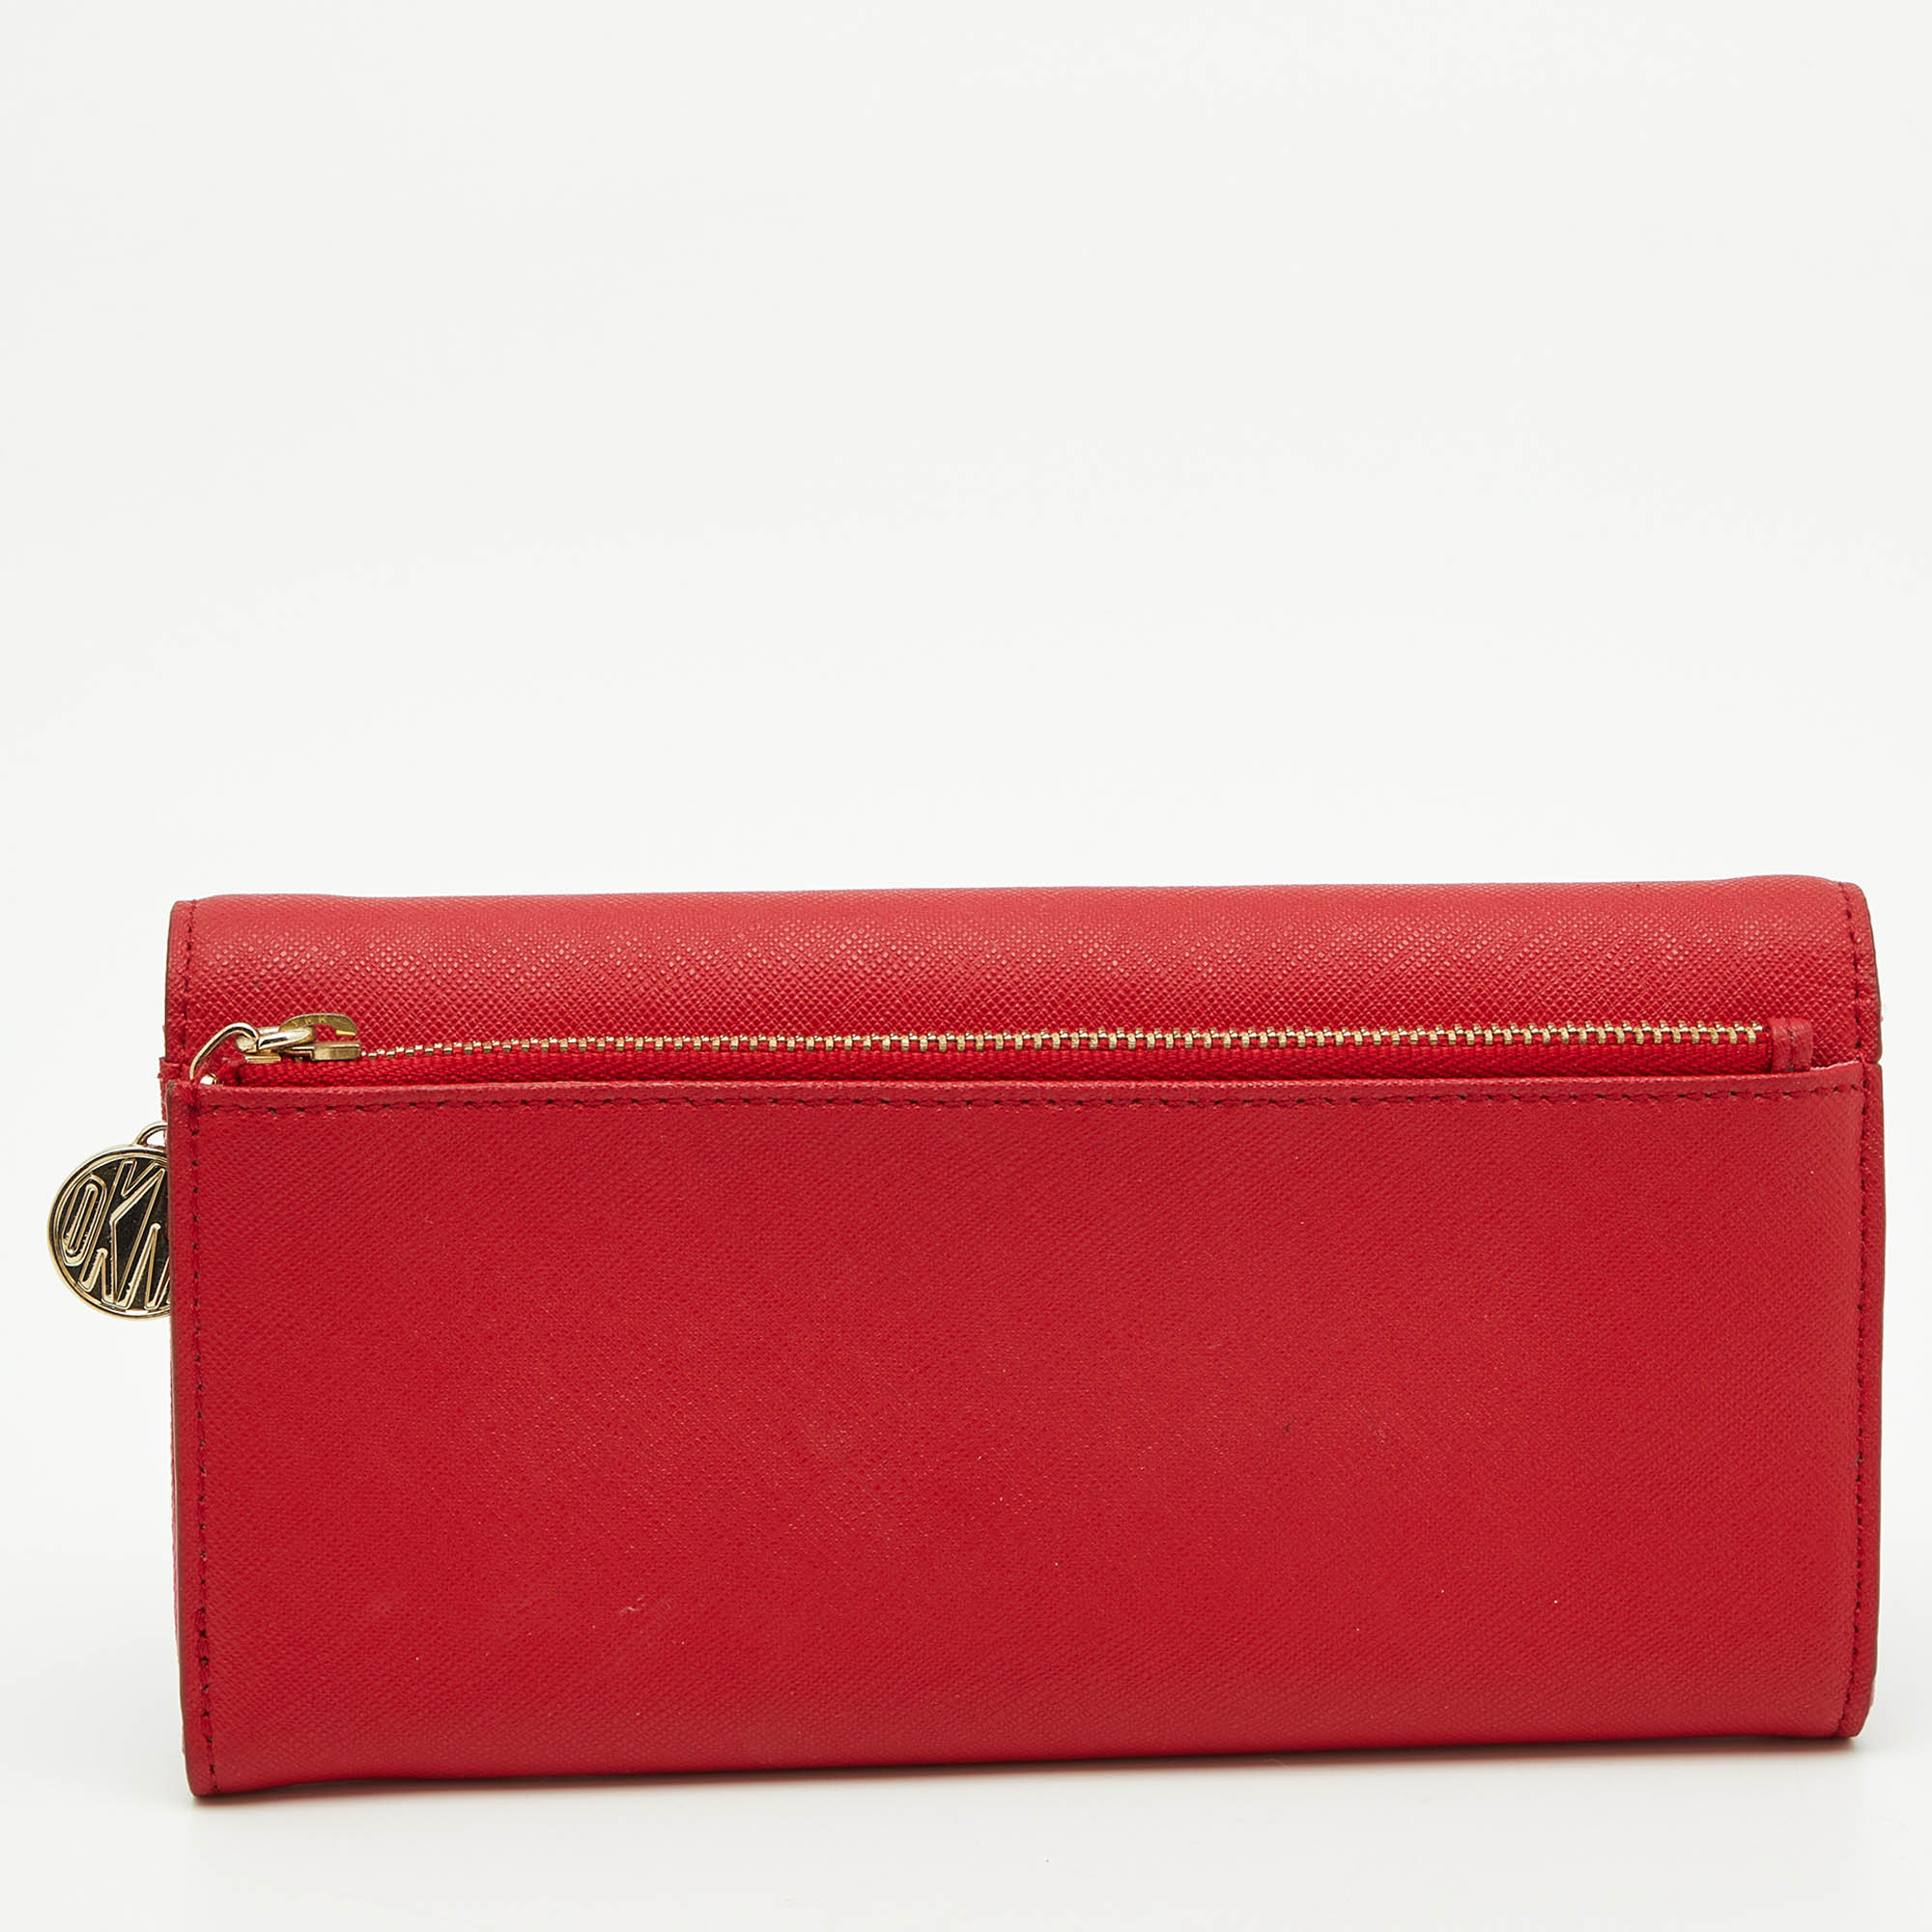 DKNY Red Leather Flap Continental Wallet